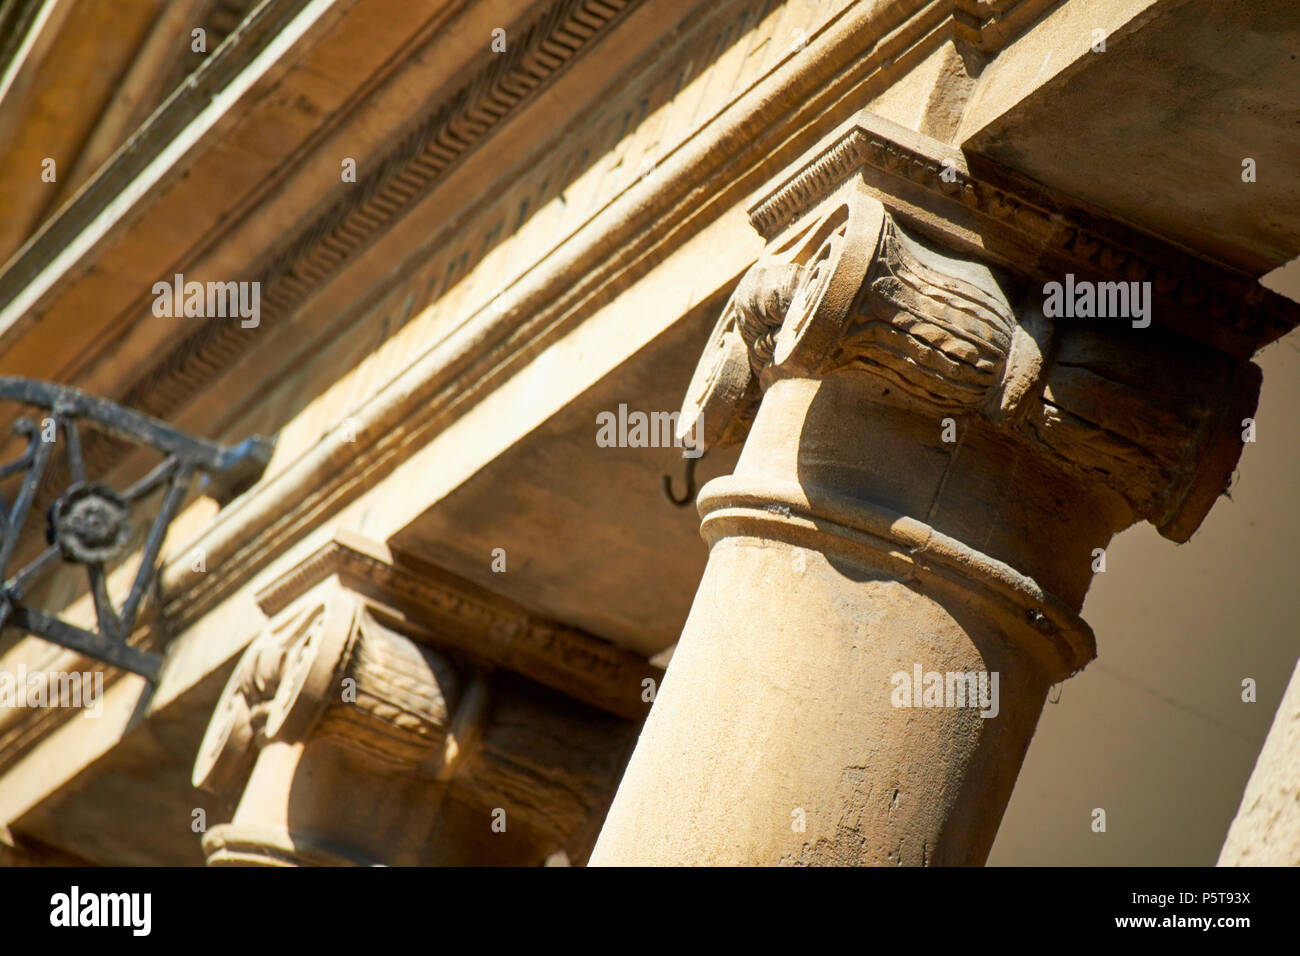 Ionic columns detail of classical architectural stone carving on the roman baths complex Bath England UK Stock Photo